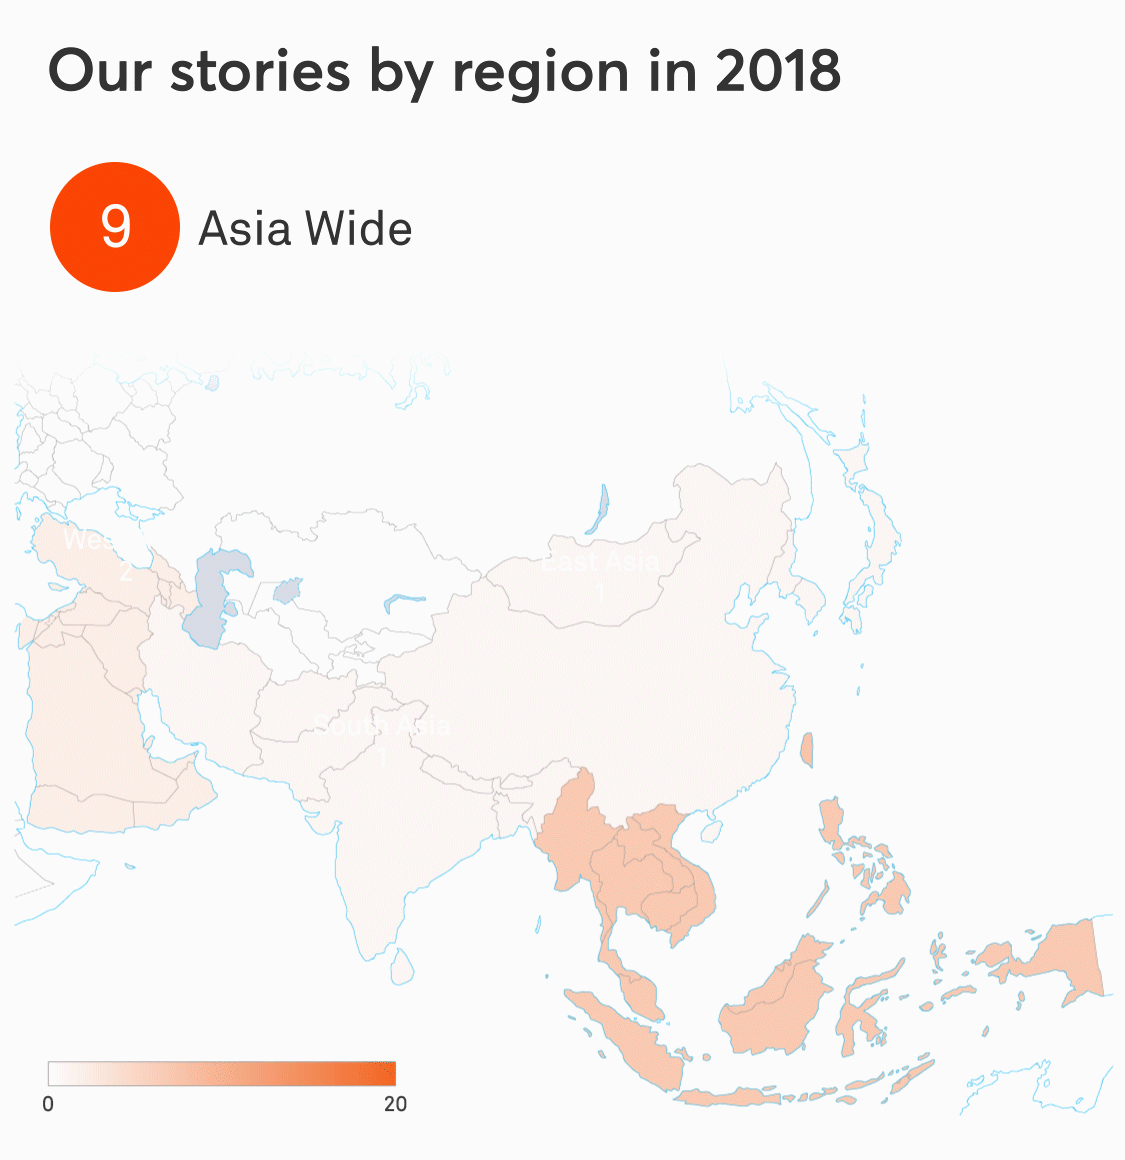 A map of how our stories are distributed by region